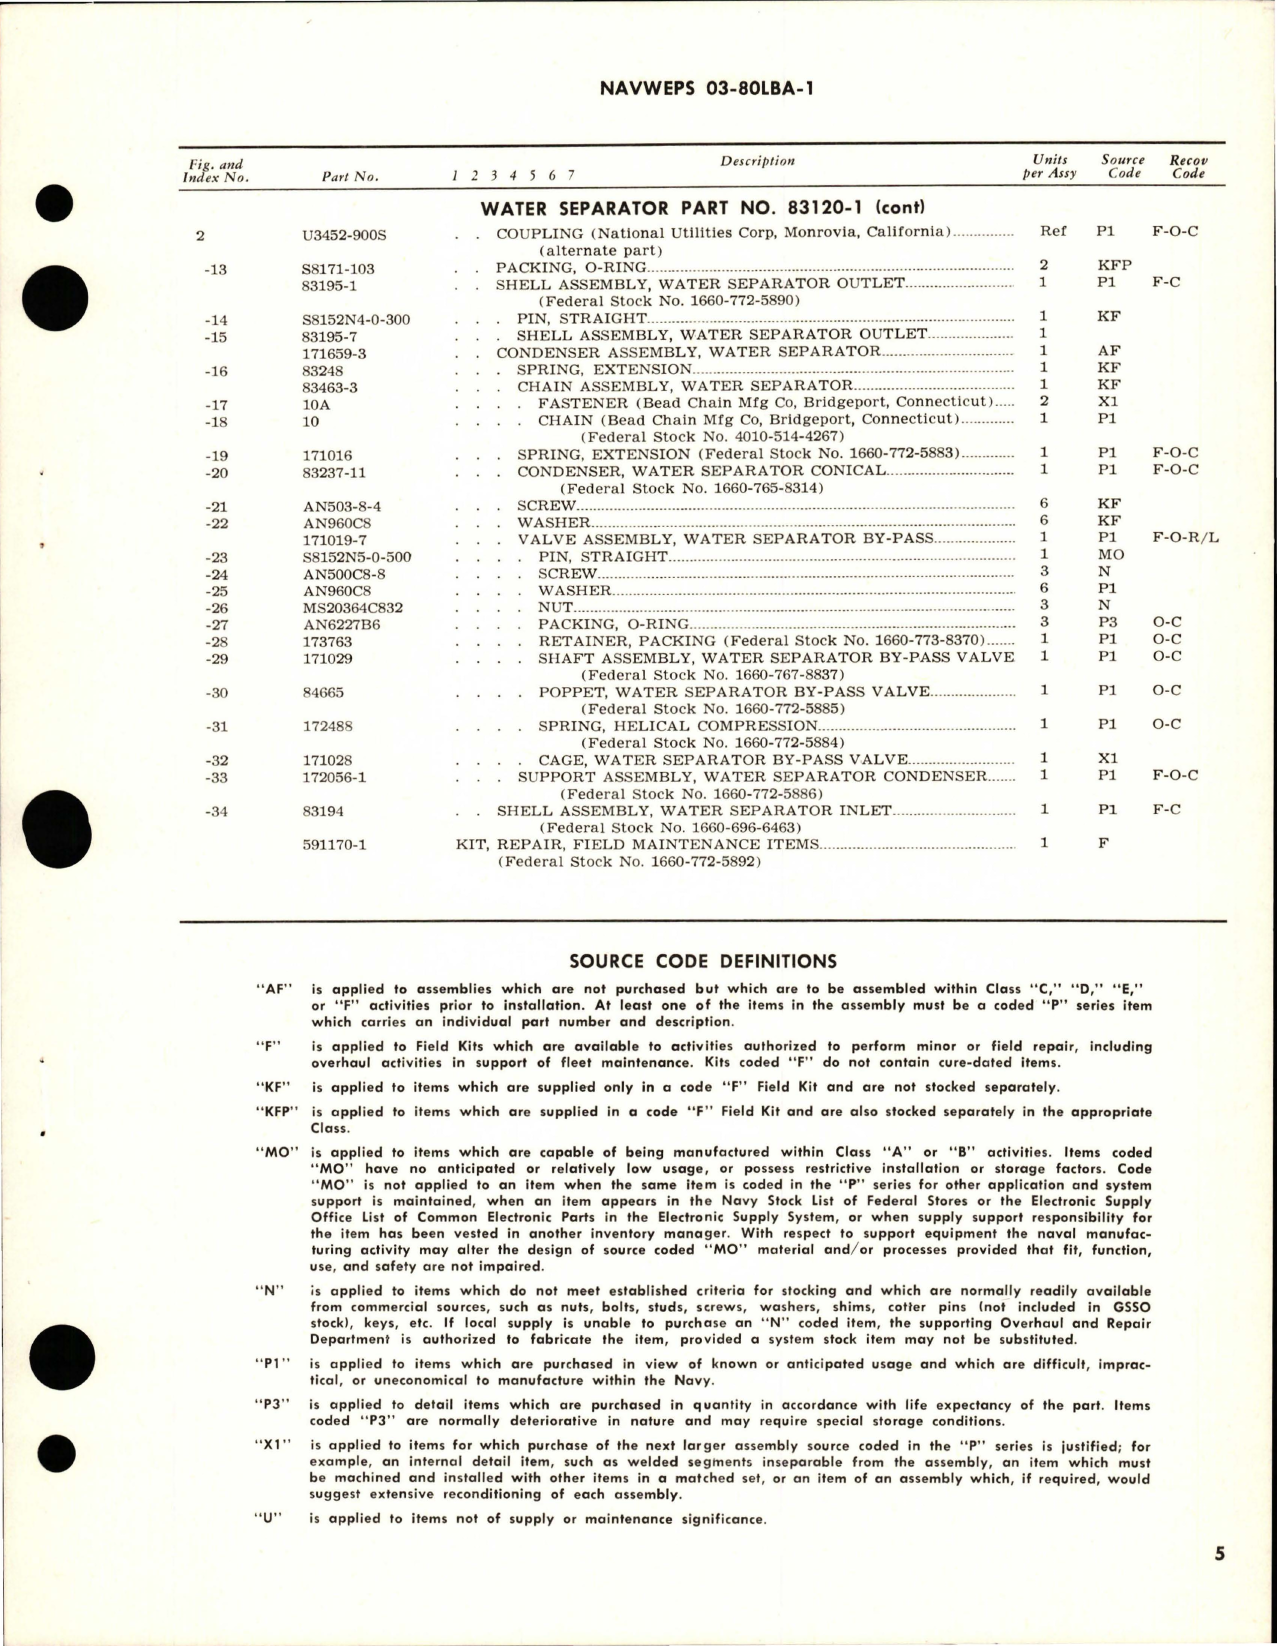 Sample page 5 from AirCorps Library document: Overhaul Instructions with Parts Breakdown for Water Separator - Part 83120-1